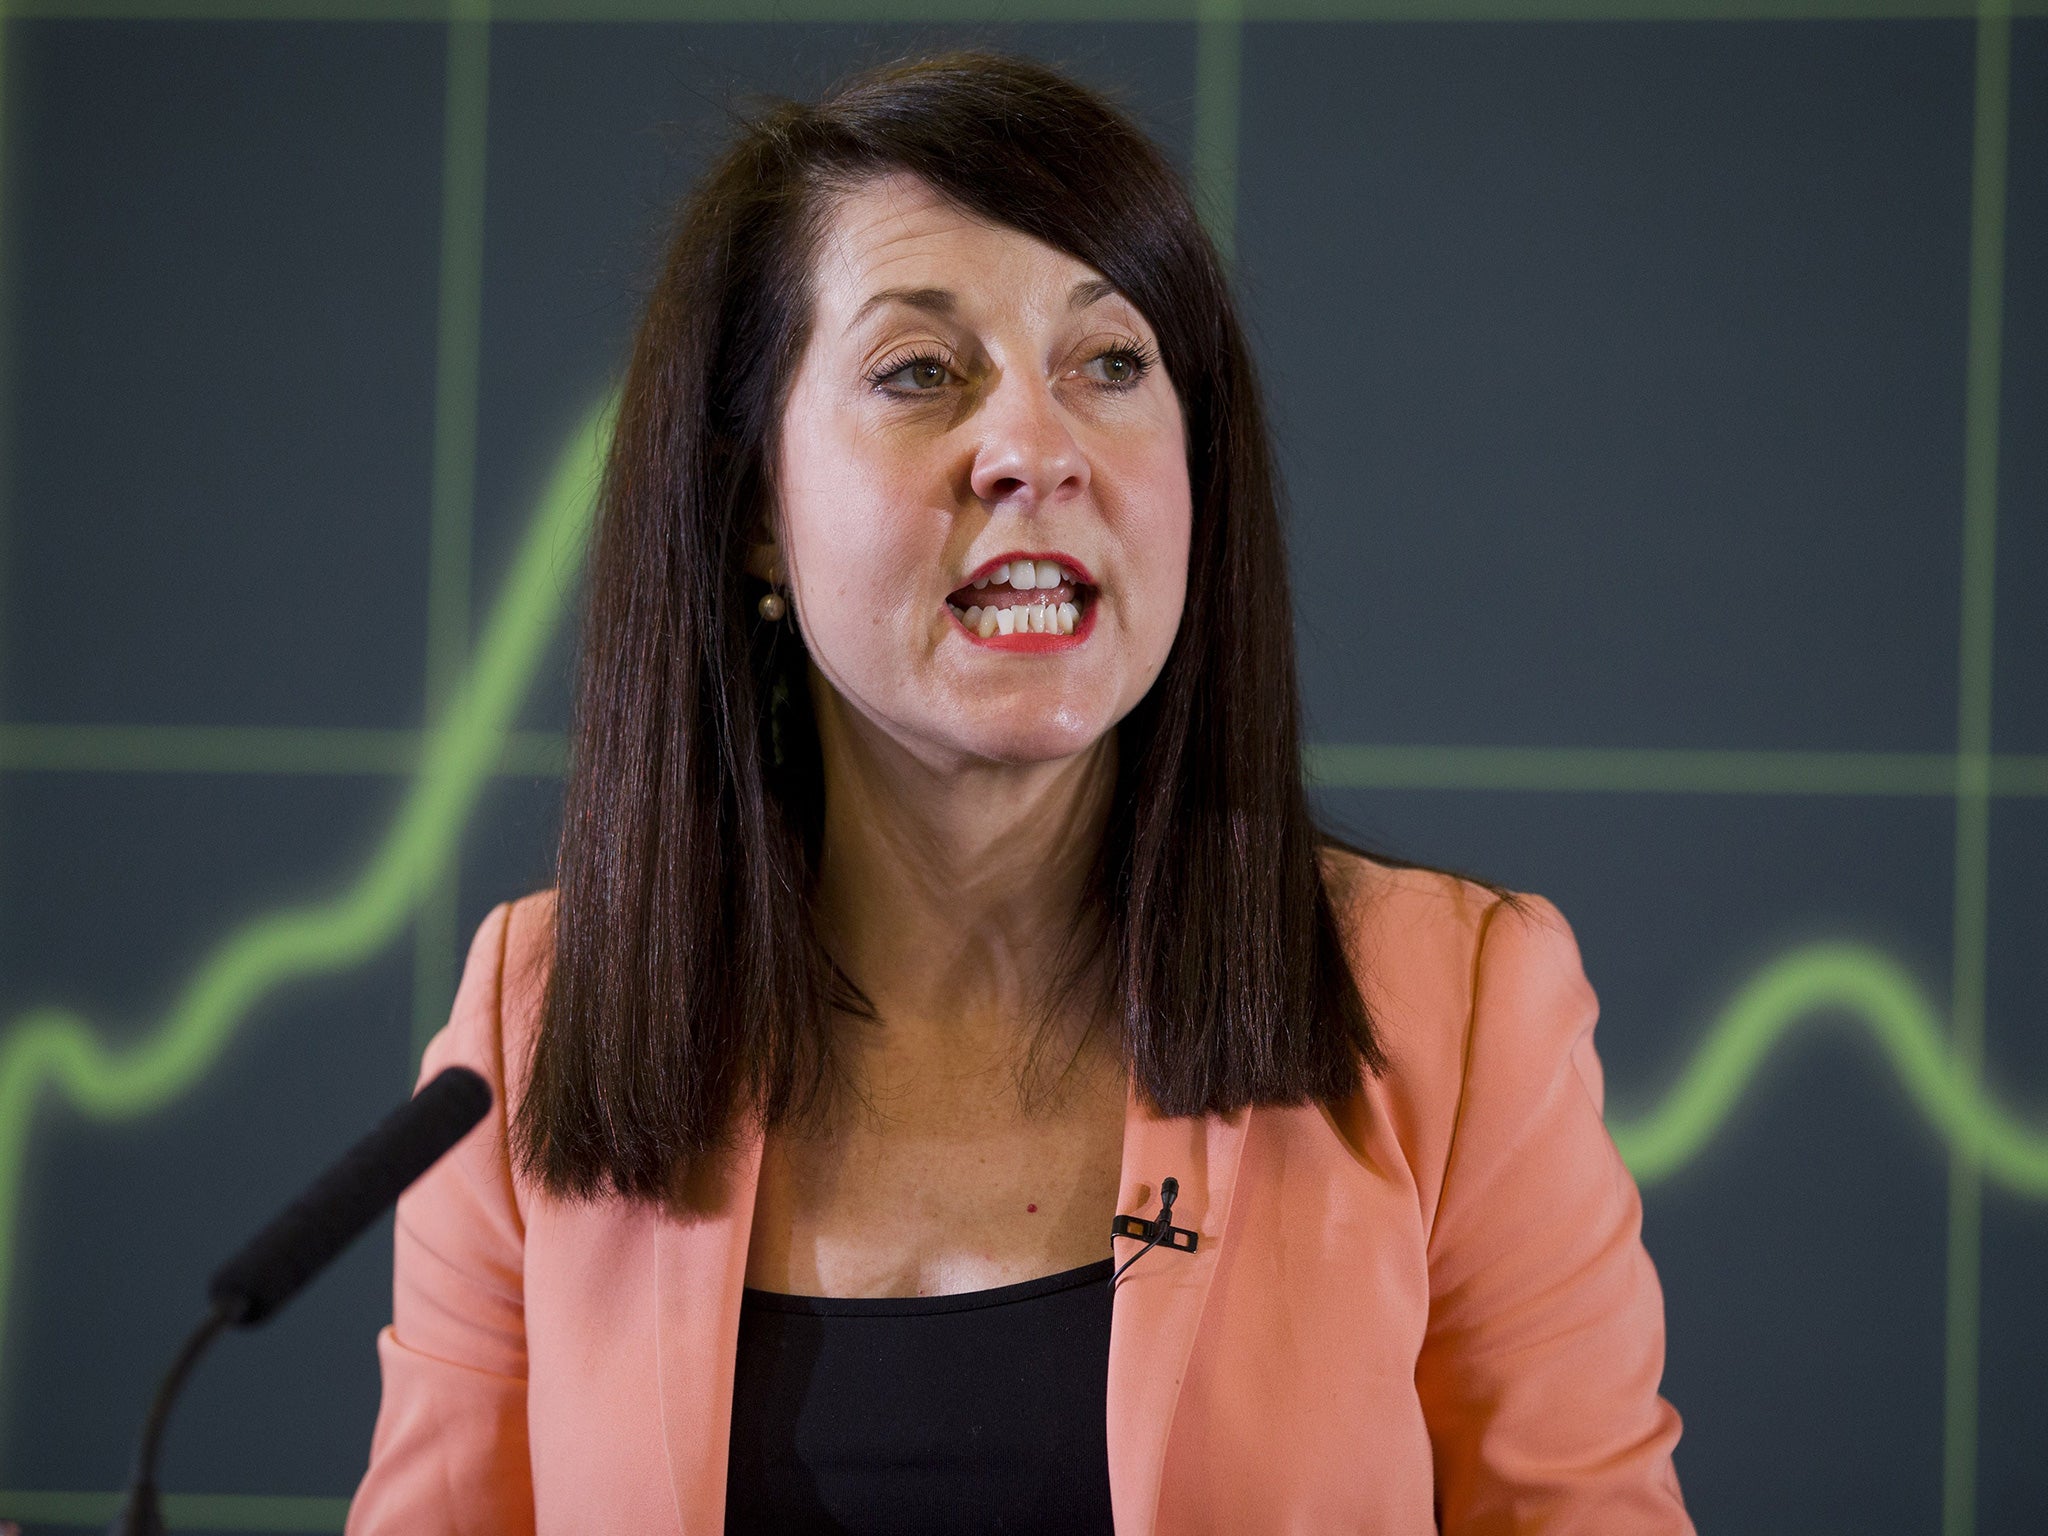 Liz Kendall played a key role in the introduction of the smoking ban